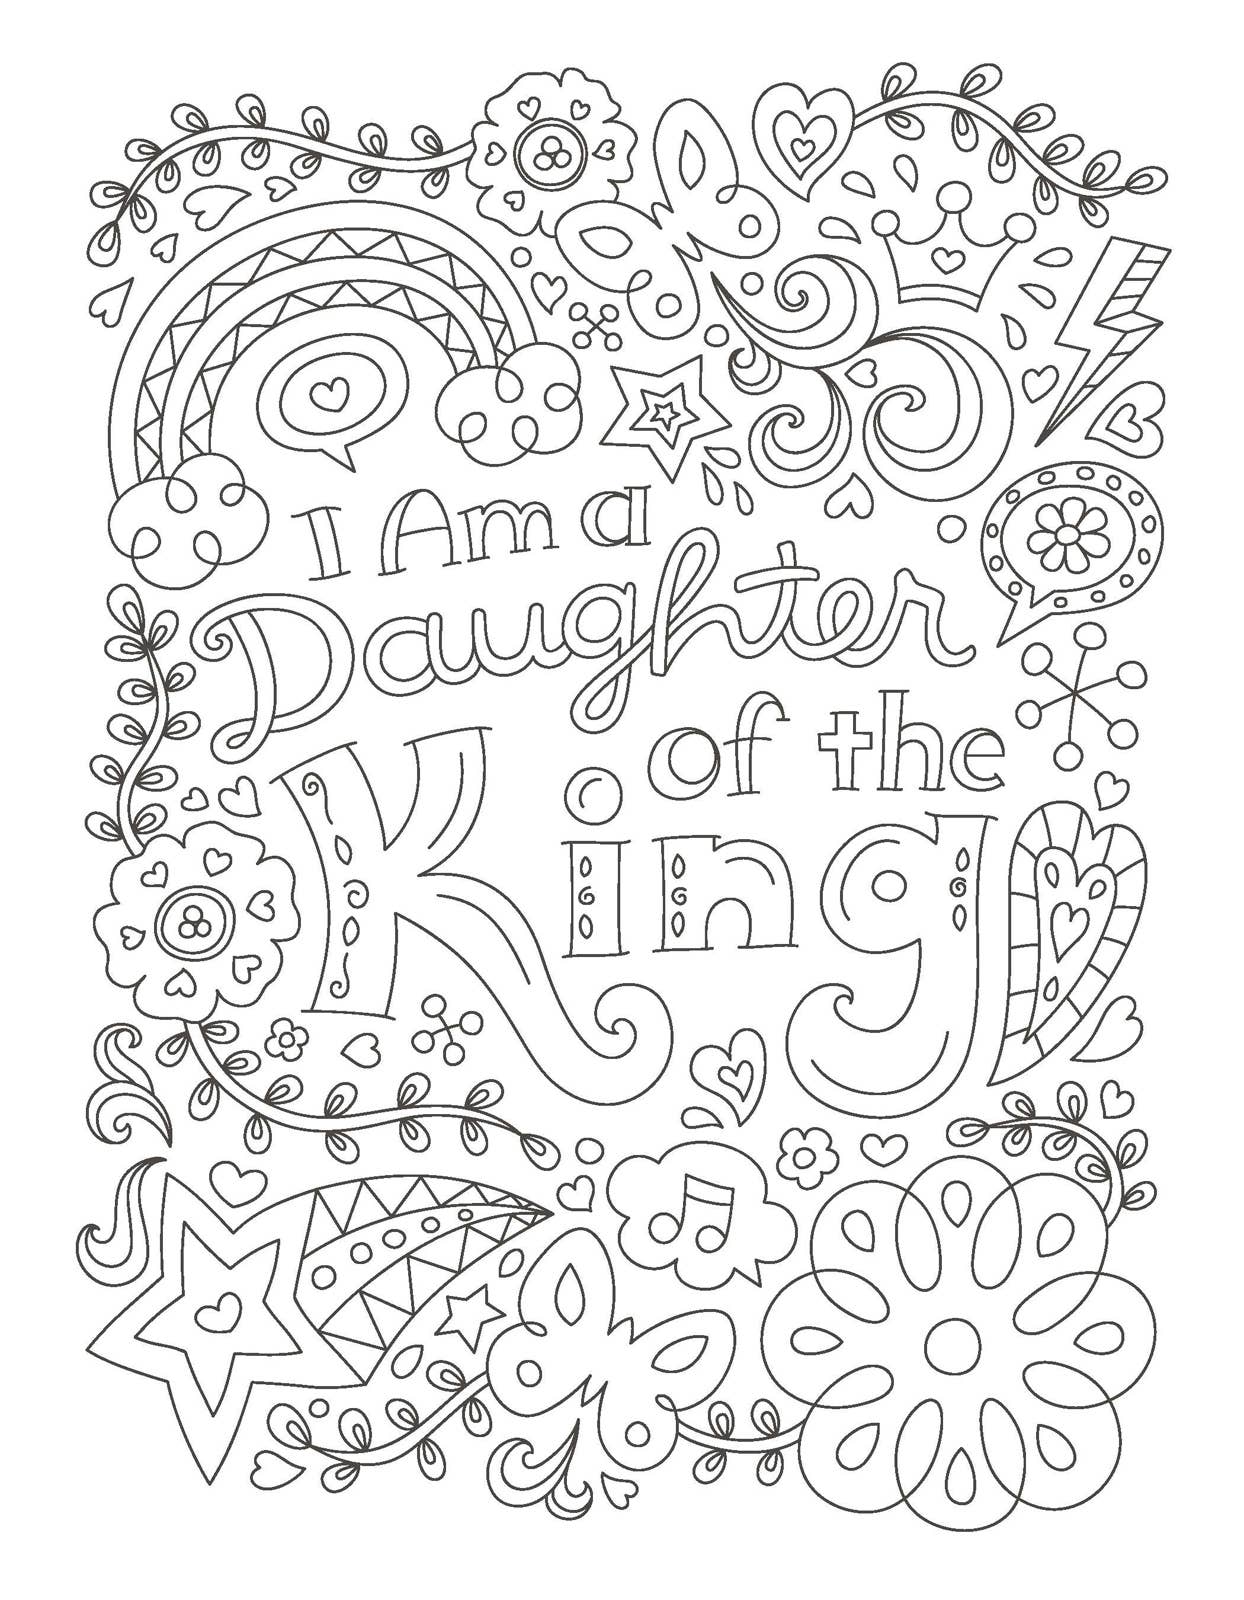 The Power of a Praying Girl Coloring Book, Book - Tweens